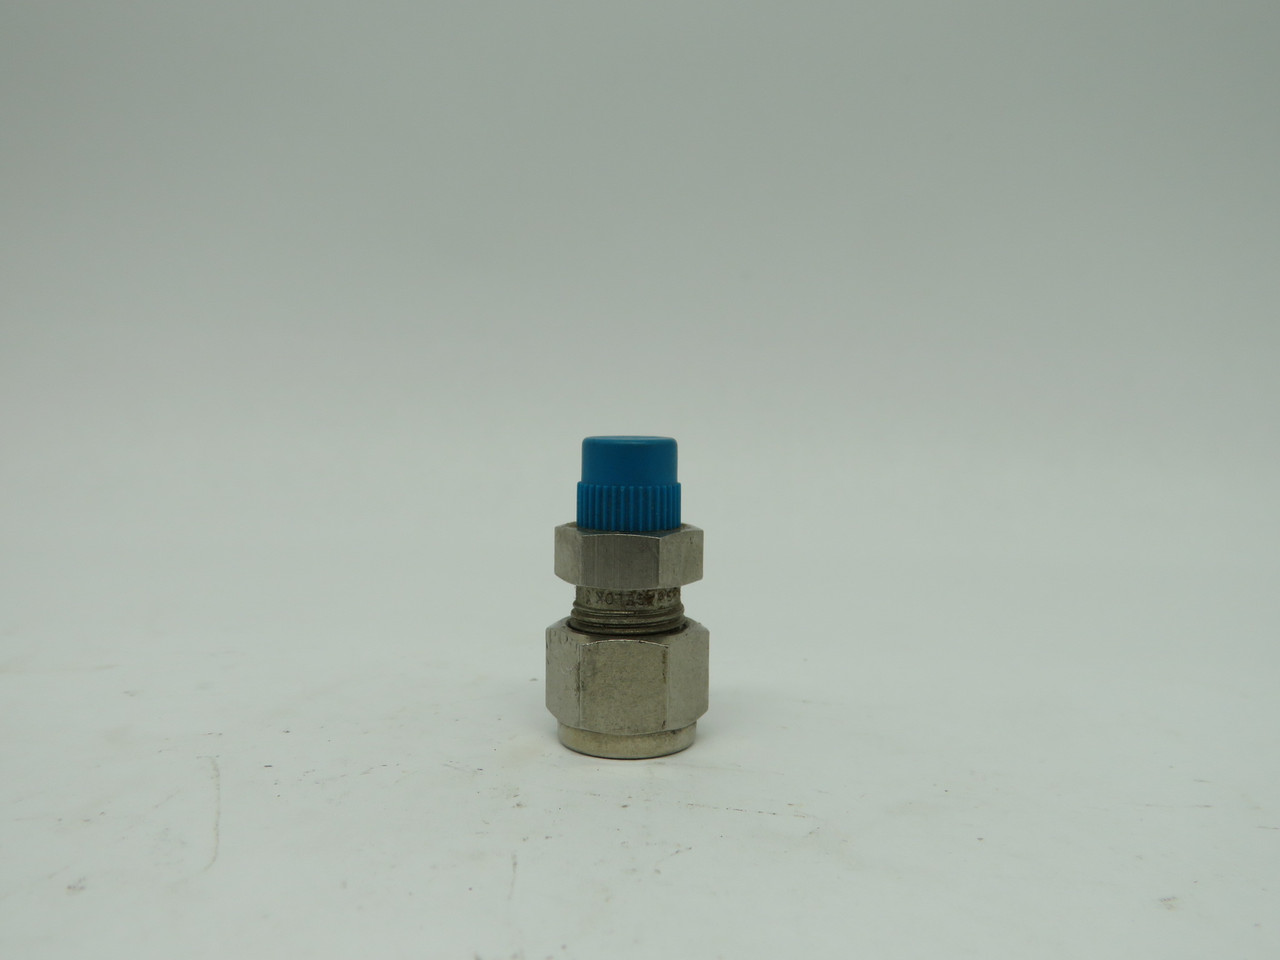 Swagelok SS-600-1-2 Tube Fitting Male Connector 3/8" Tube ODx1-8" Male NPT USED